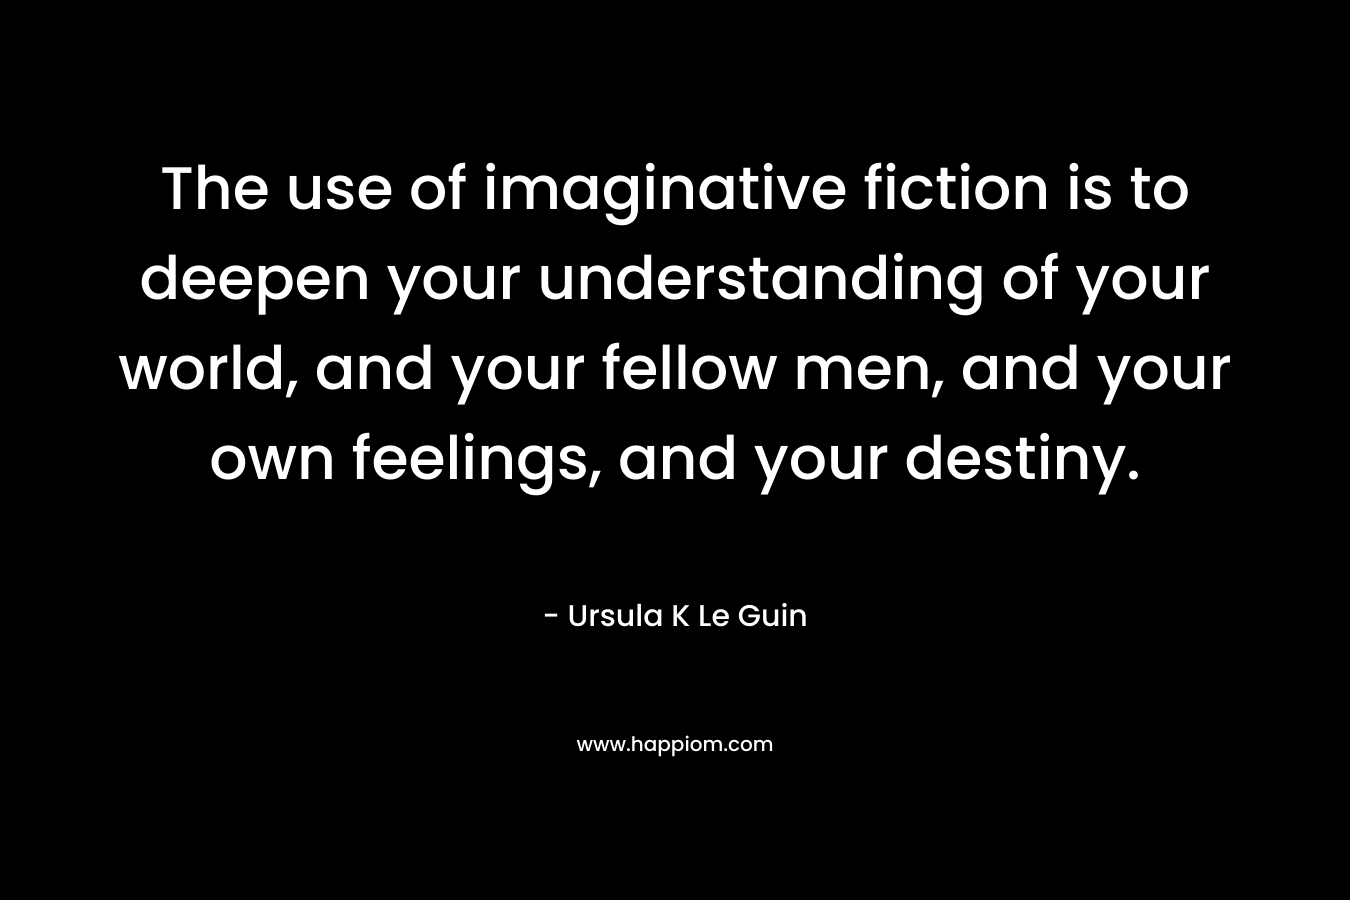 The use of imaginative fiction is to deepen your understanding of your world, and your fellow men, and your own feelings, and your destiny.